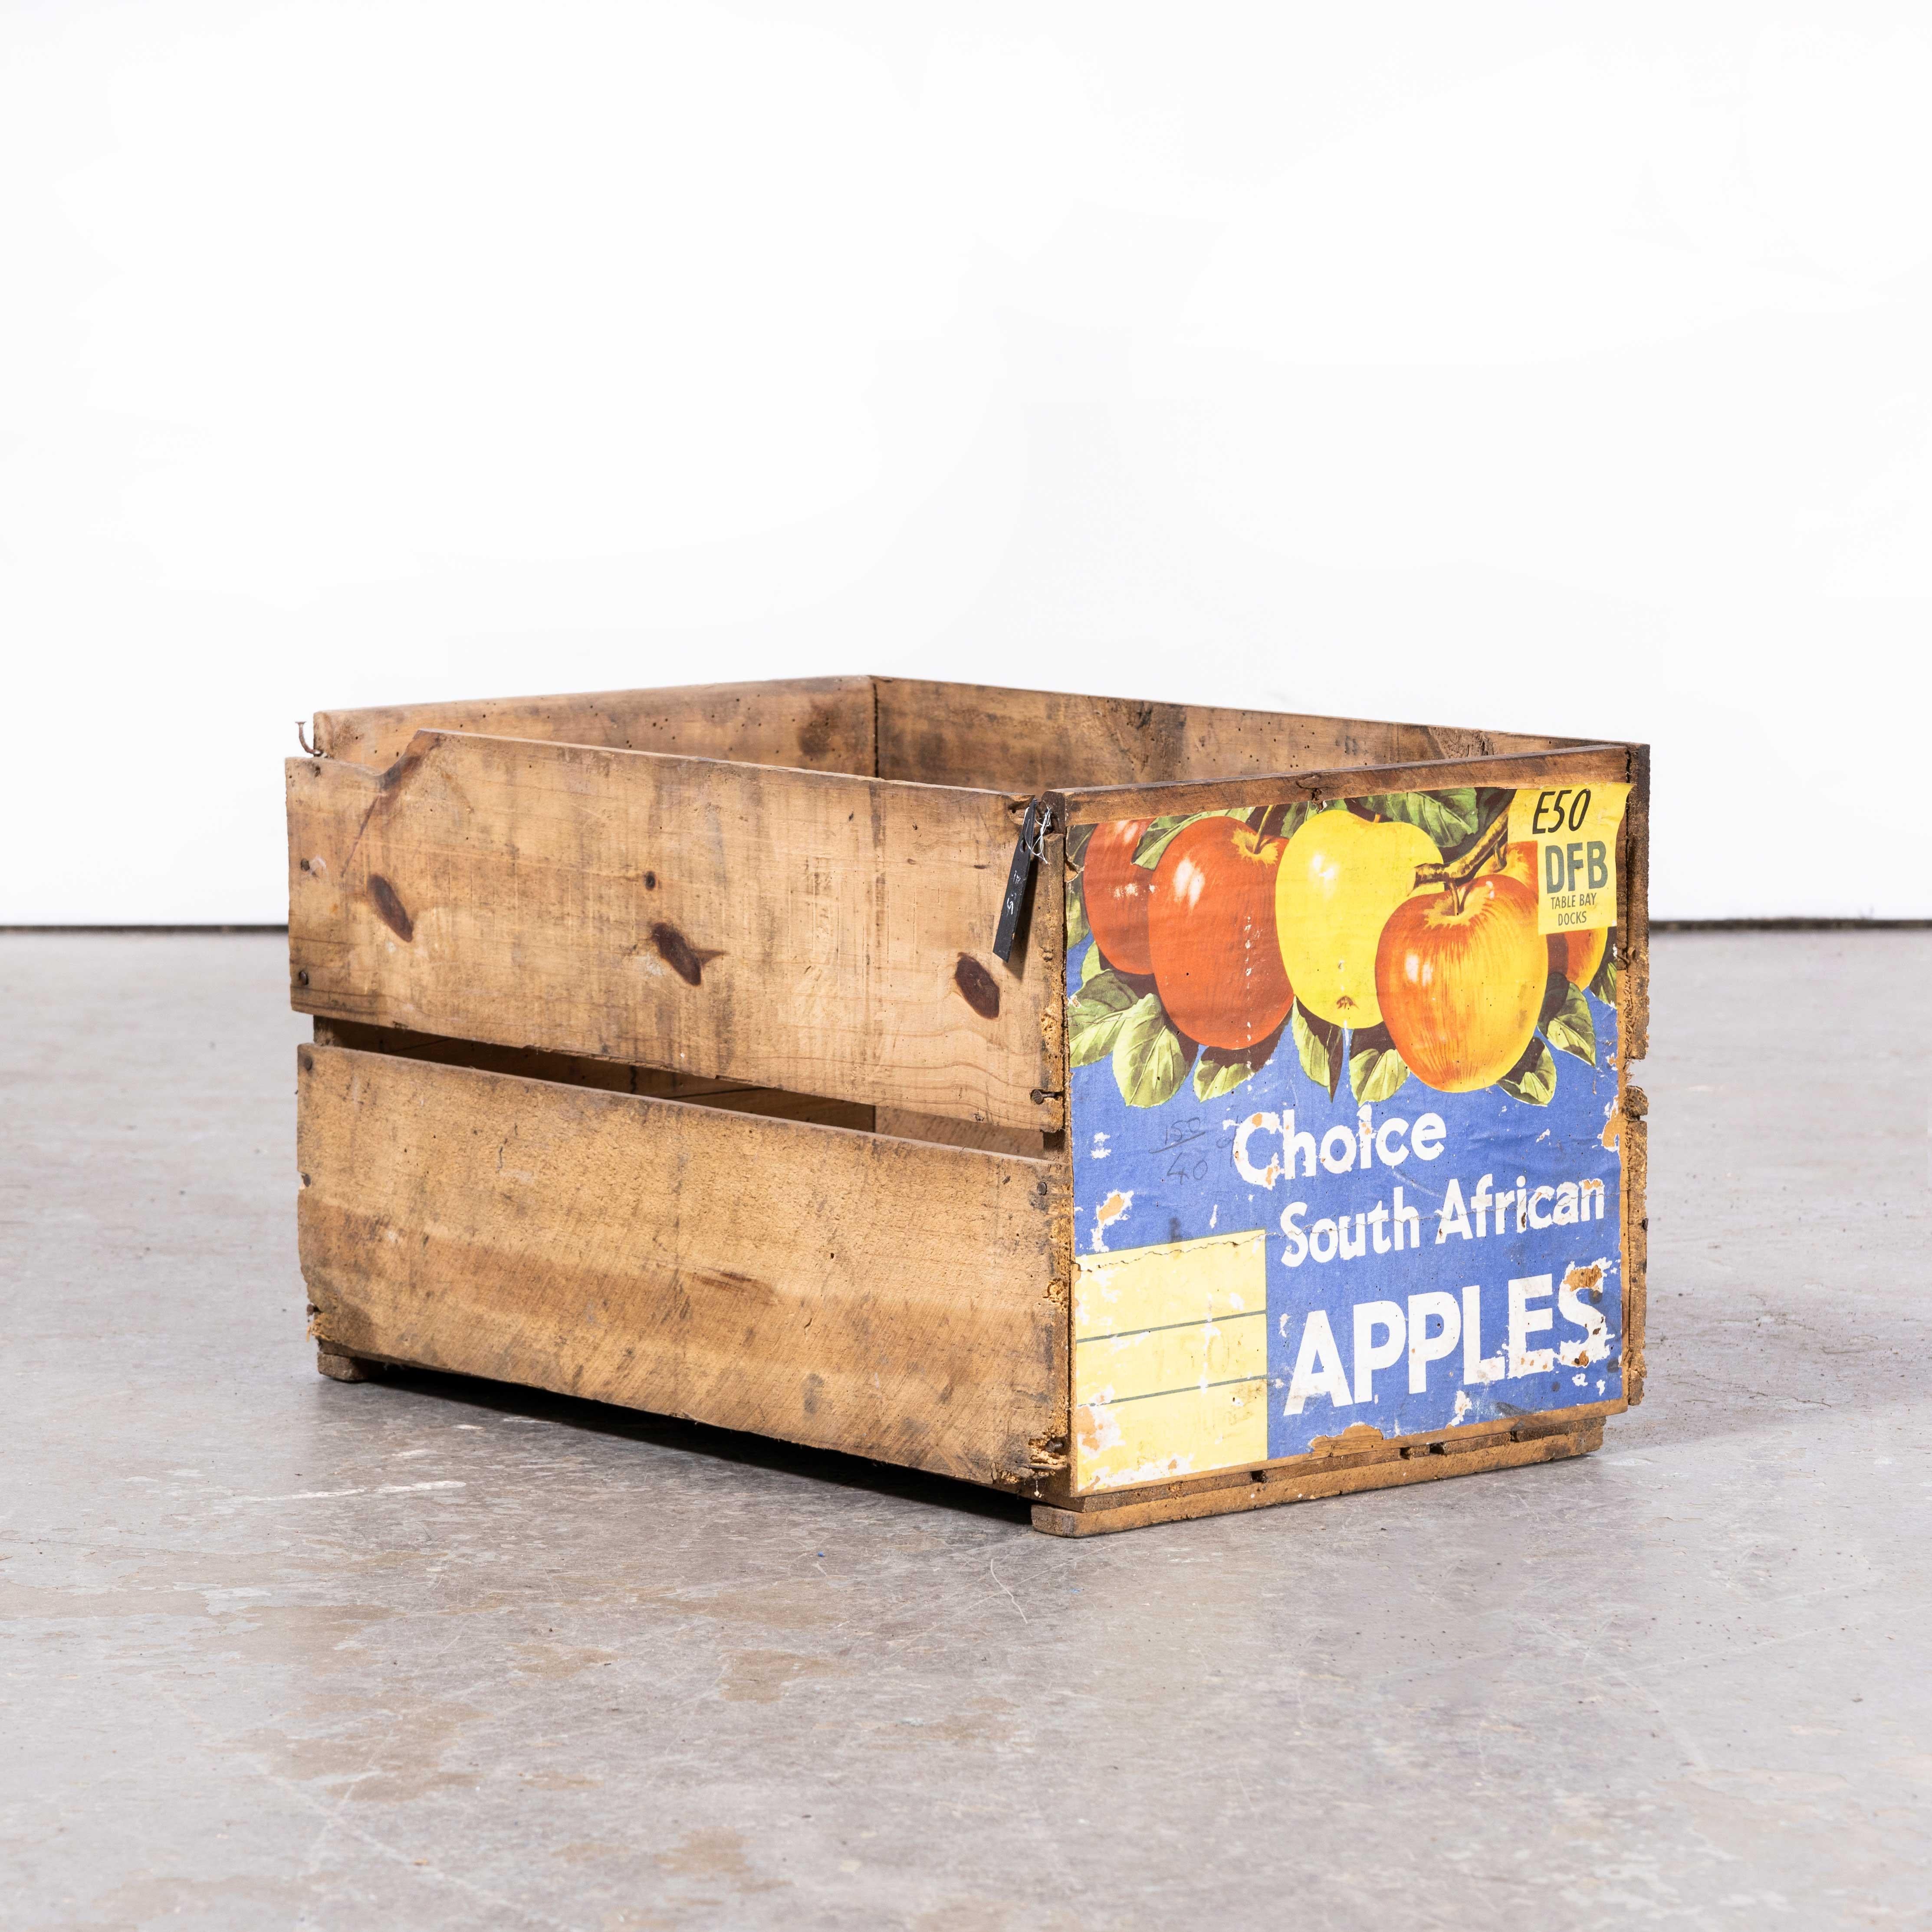 1950s South African Branded Produce Crate
1950s South African Branded Produce Crate. Good honest produce crate with distinct branding.

WORKSHOP REPORT
Our workshop team inspect every product and carry out any needed repairs to ensure that